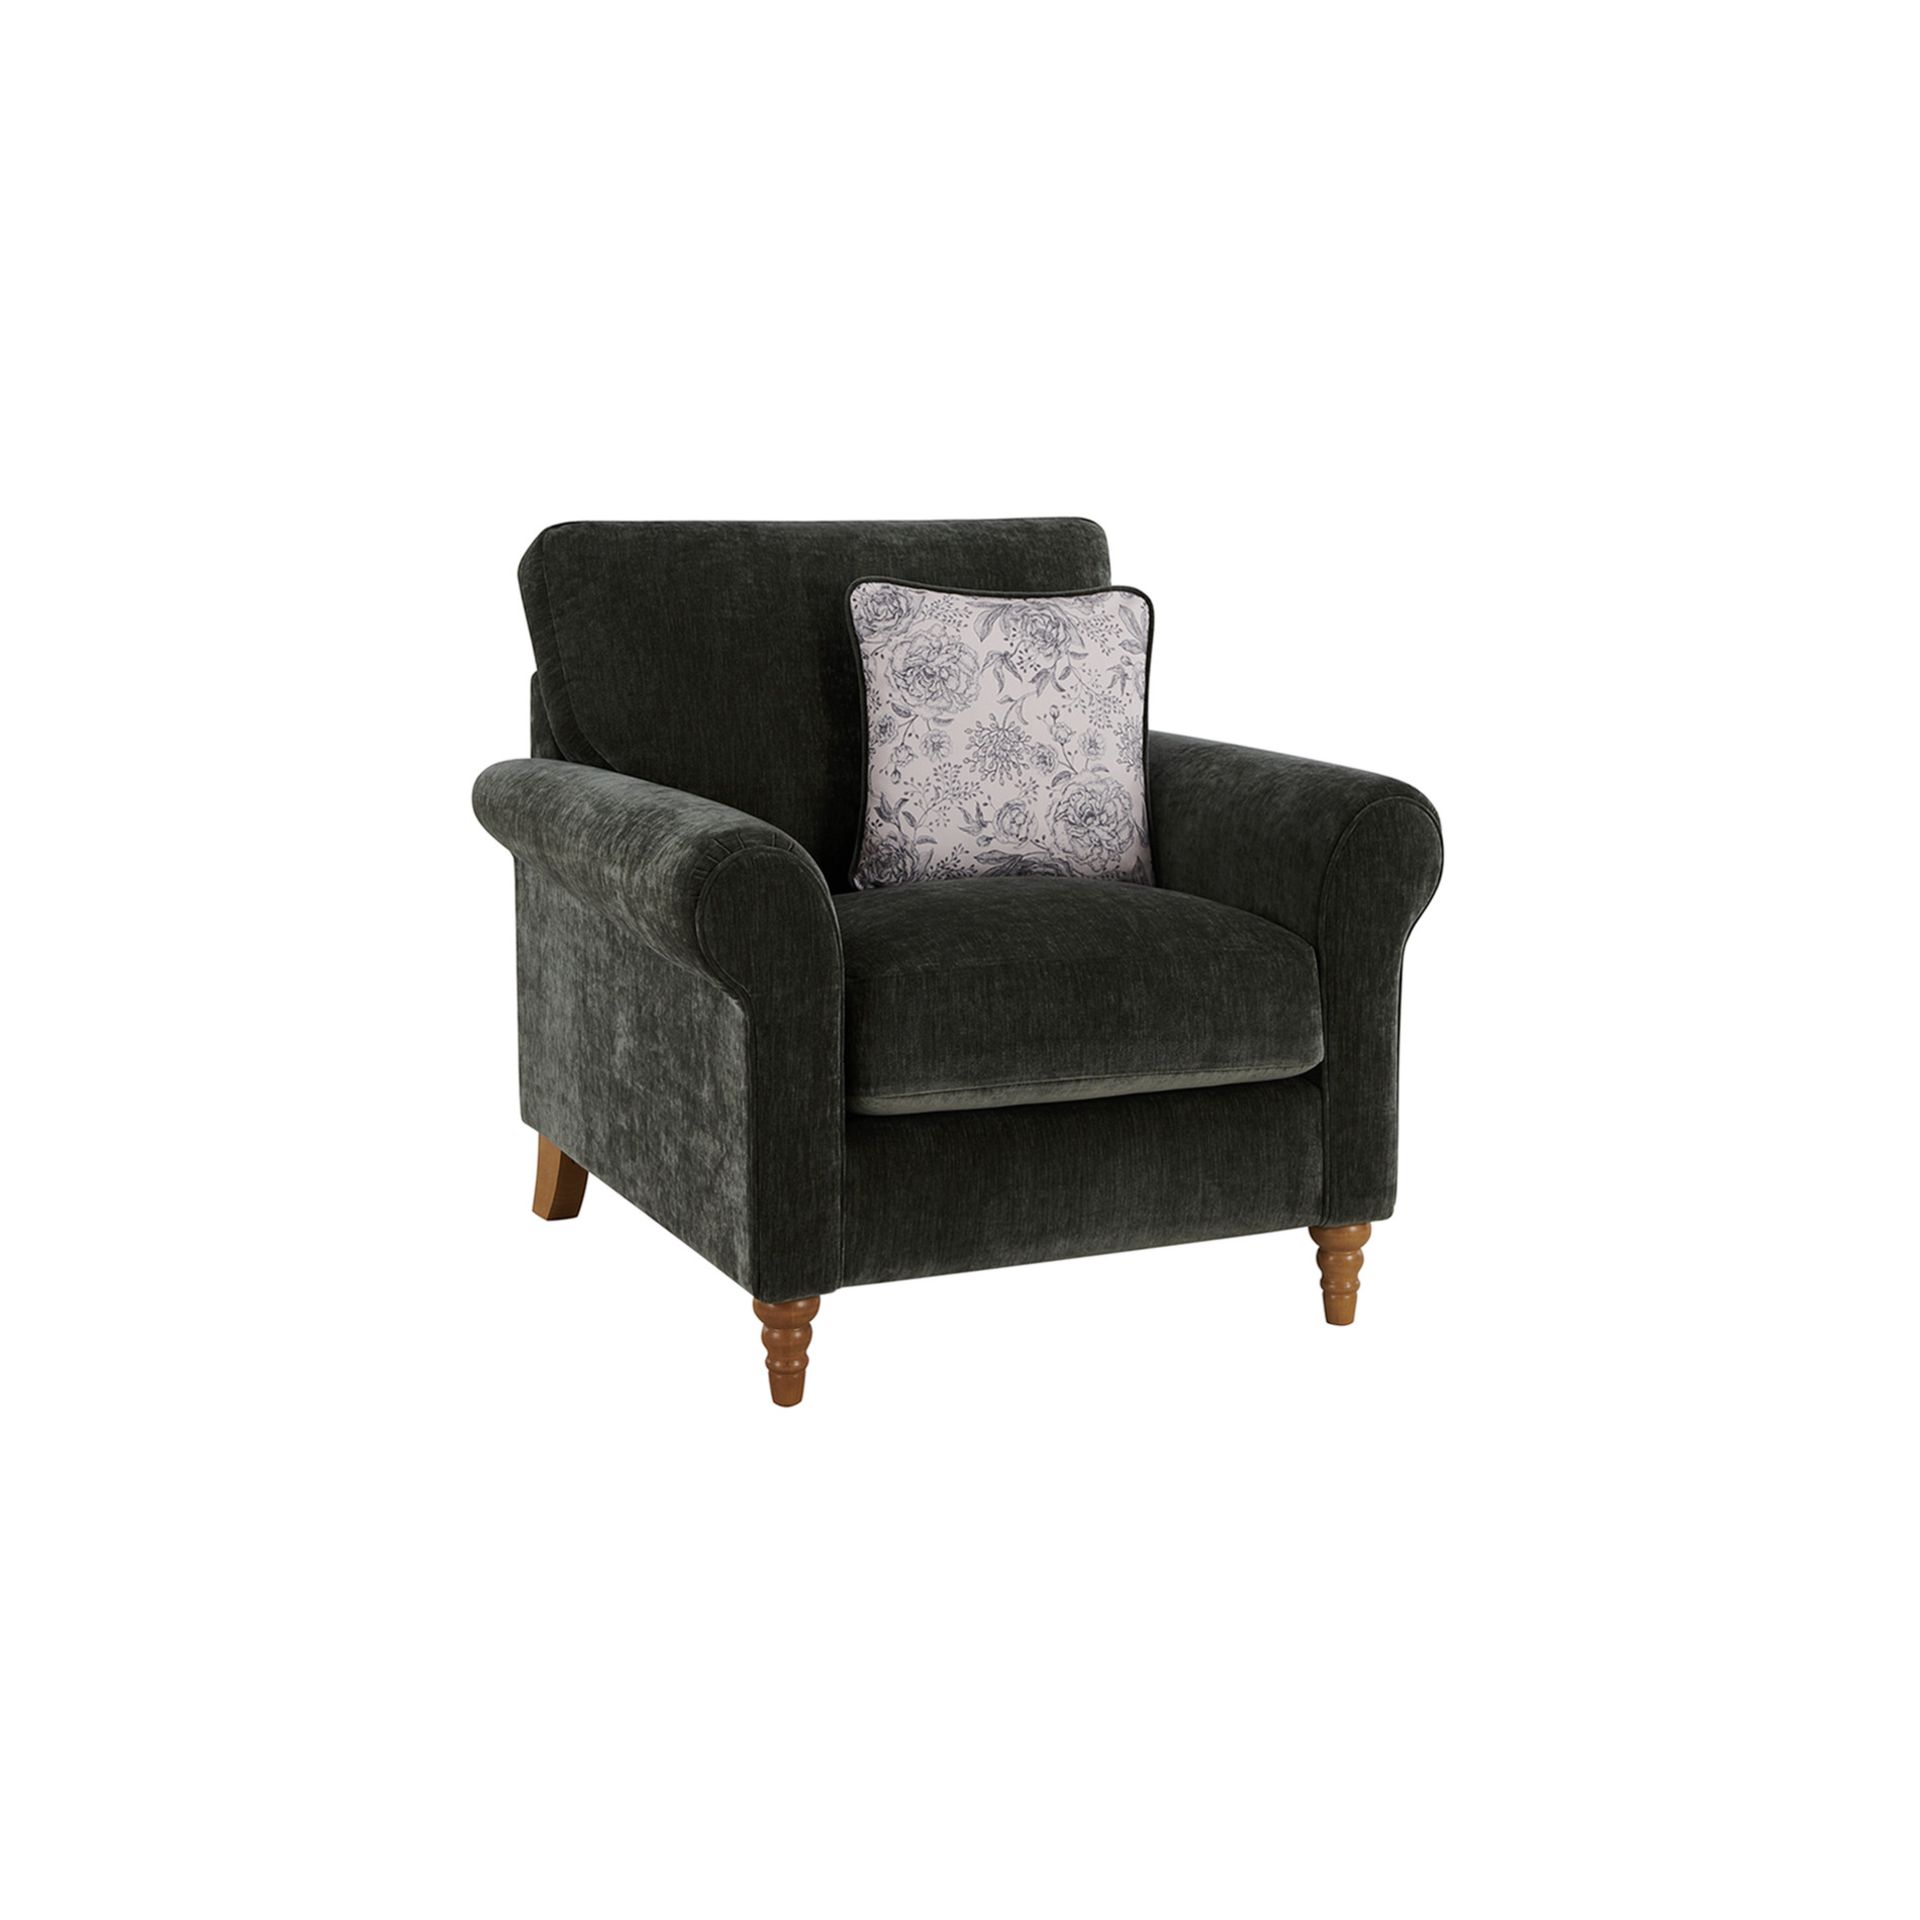 Oak Furnitureland Bramble Country Style Armchair in Pellier Thyme with Carbon Scatters RRP 679. - Image 2 of 2